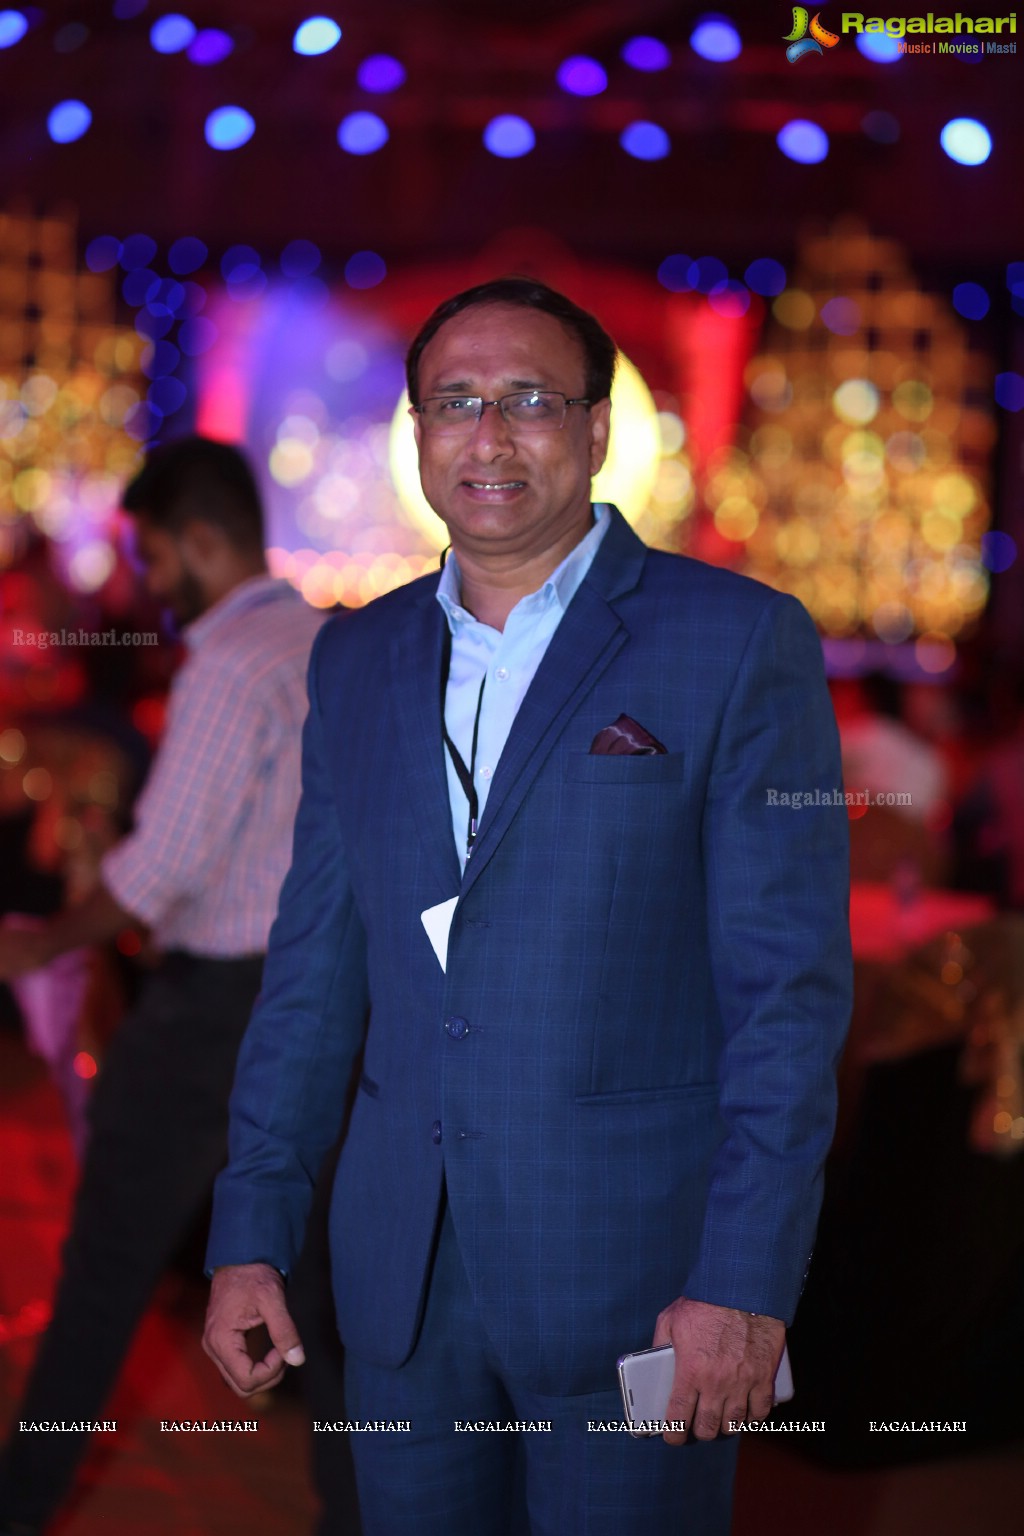 TCEI (Telangana Chambers of Events Industry) Awards Ceremony 2017 at HITEX